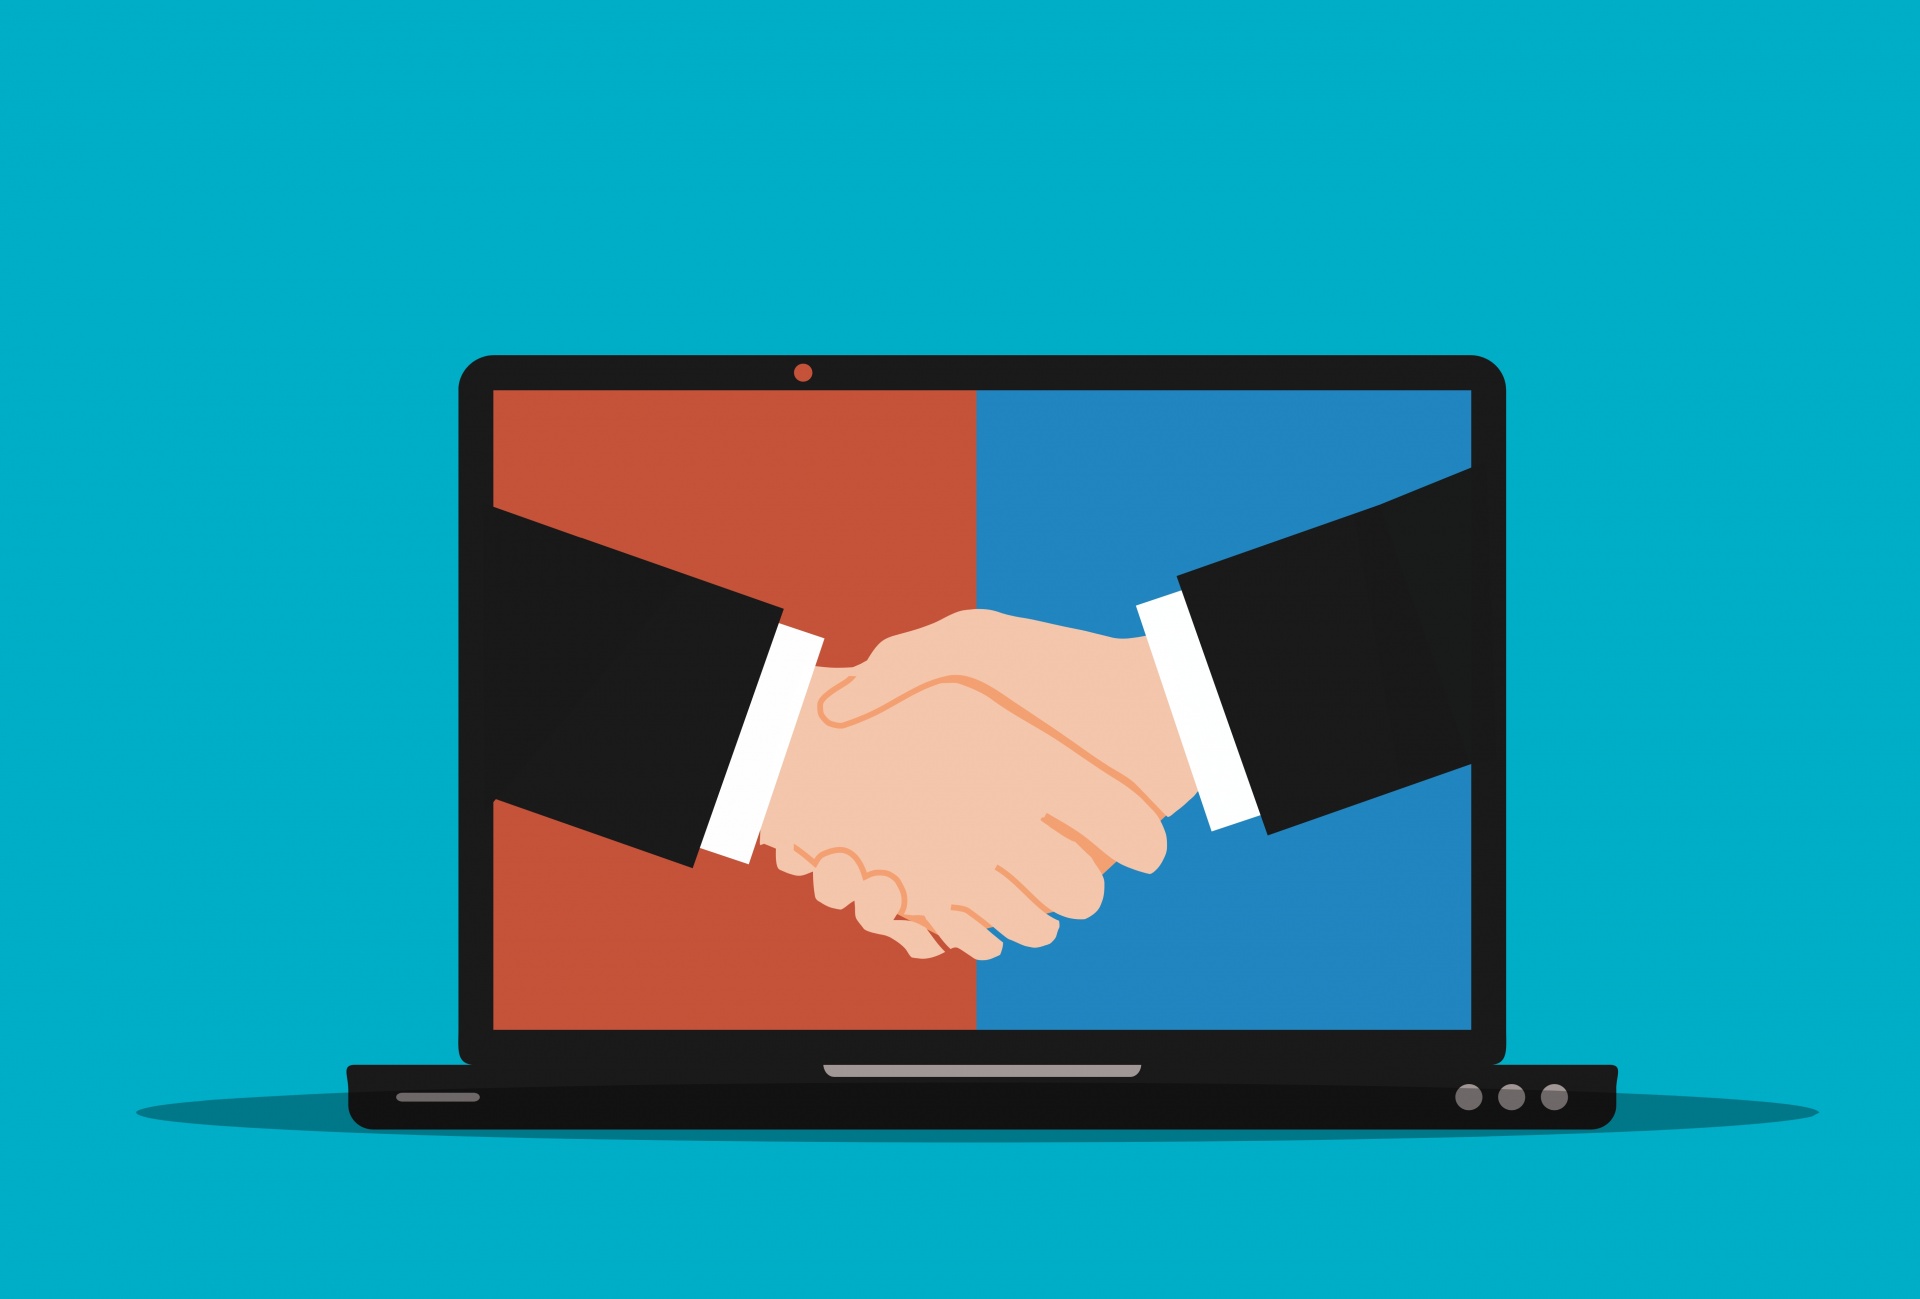 handshake, agreement, online, trust, cooperation, business, help, laptop, internet, technology, meeting, assistance, cyber, shaking, bridge, teamwork, computer, speed, working, communication, connection, solution, investment, contract, cartoon